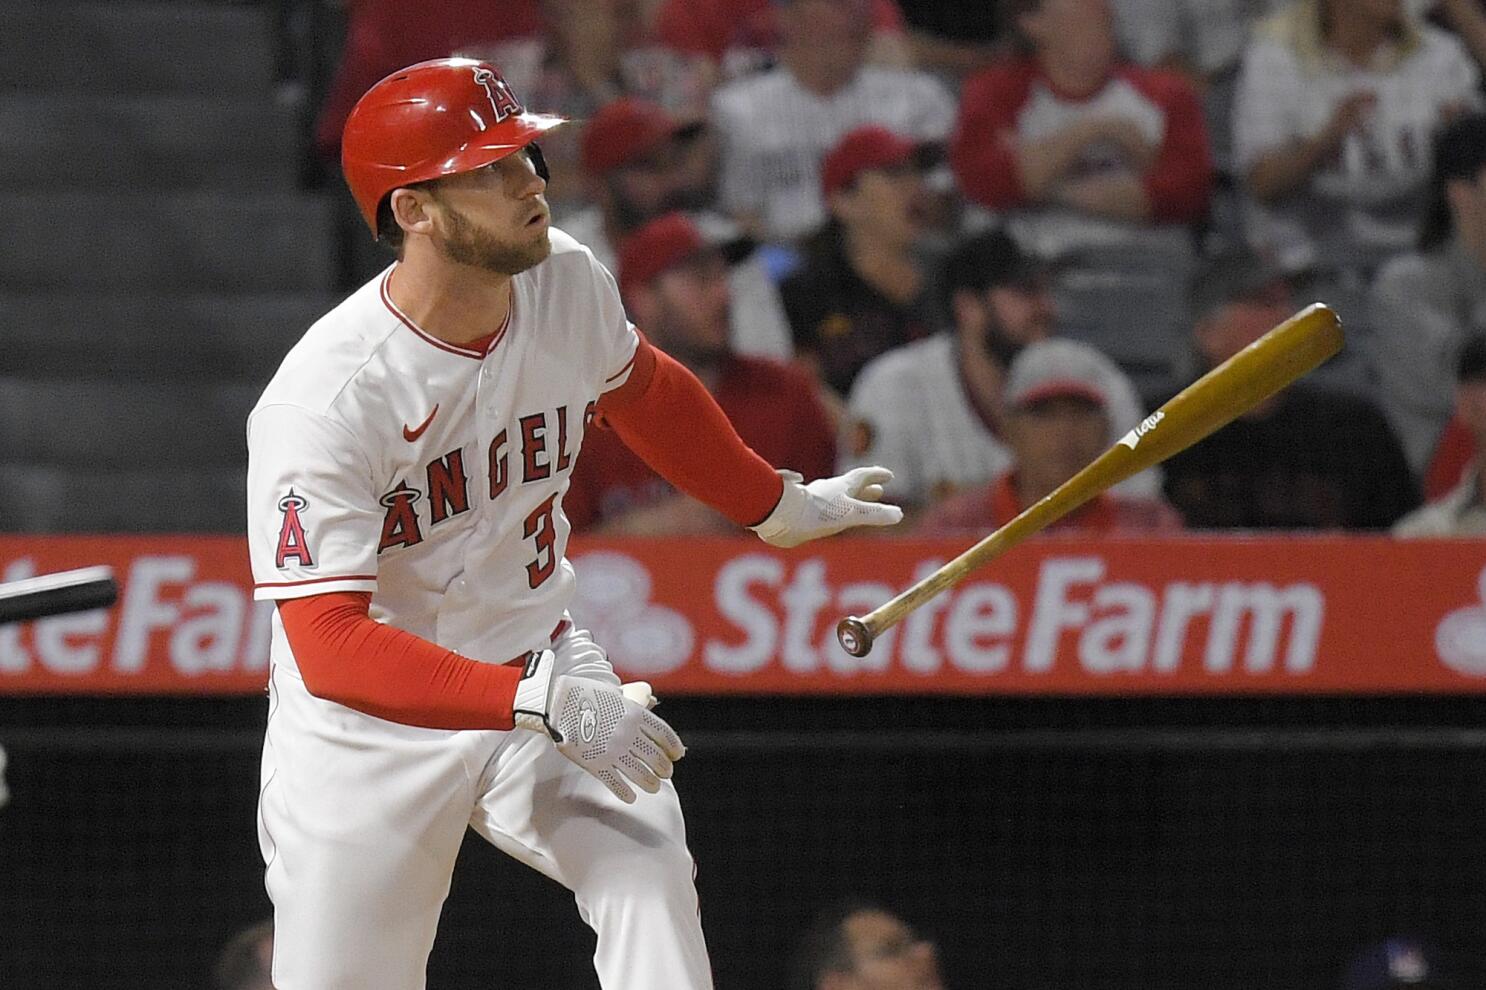 Angels' Taylor Ward has become one of MLB's top hitters - Los Angeles Times